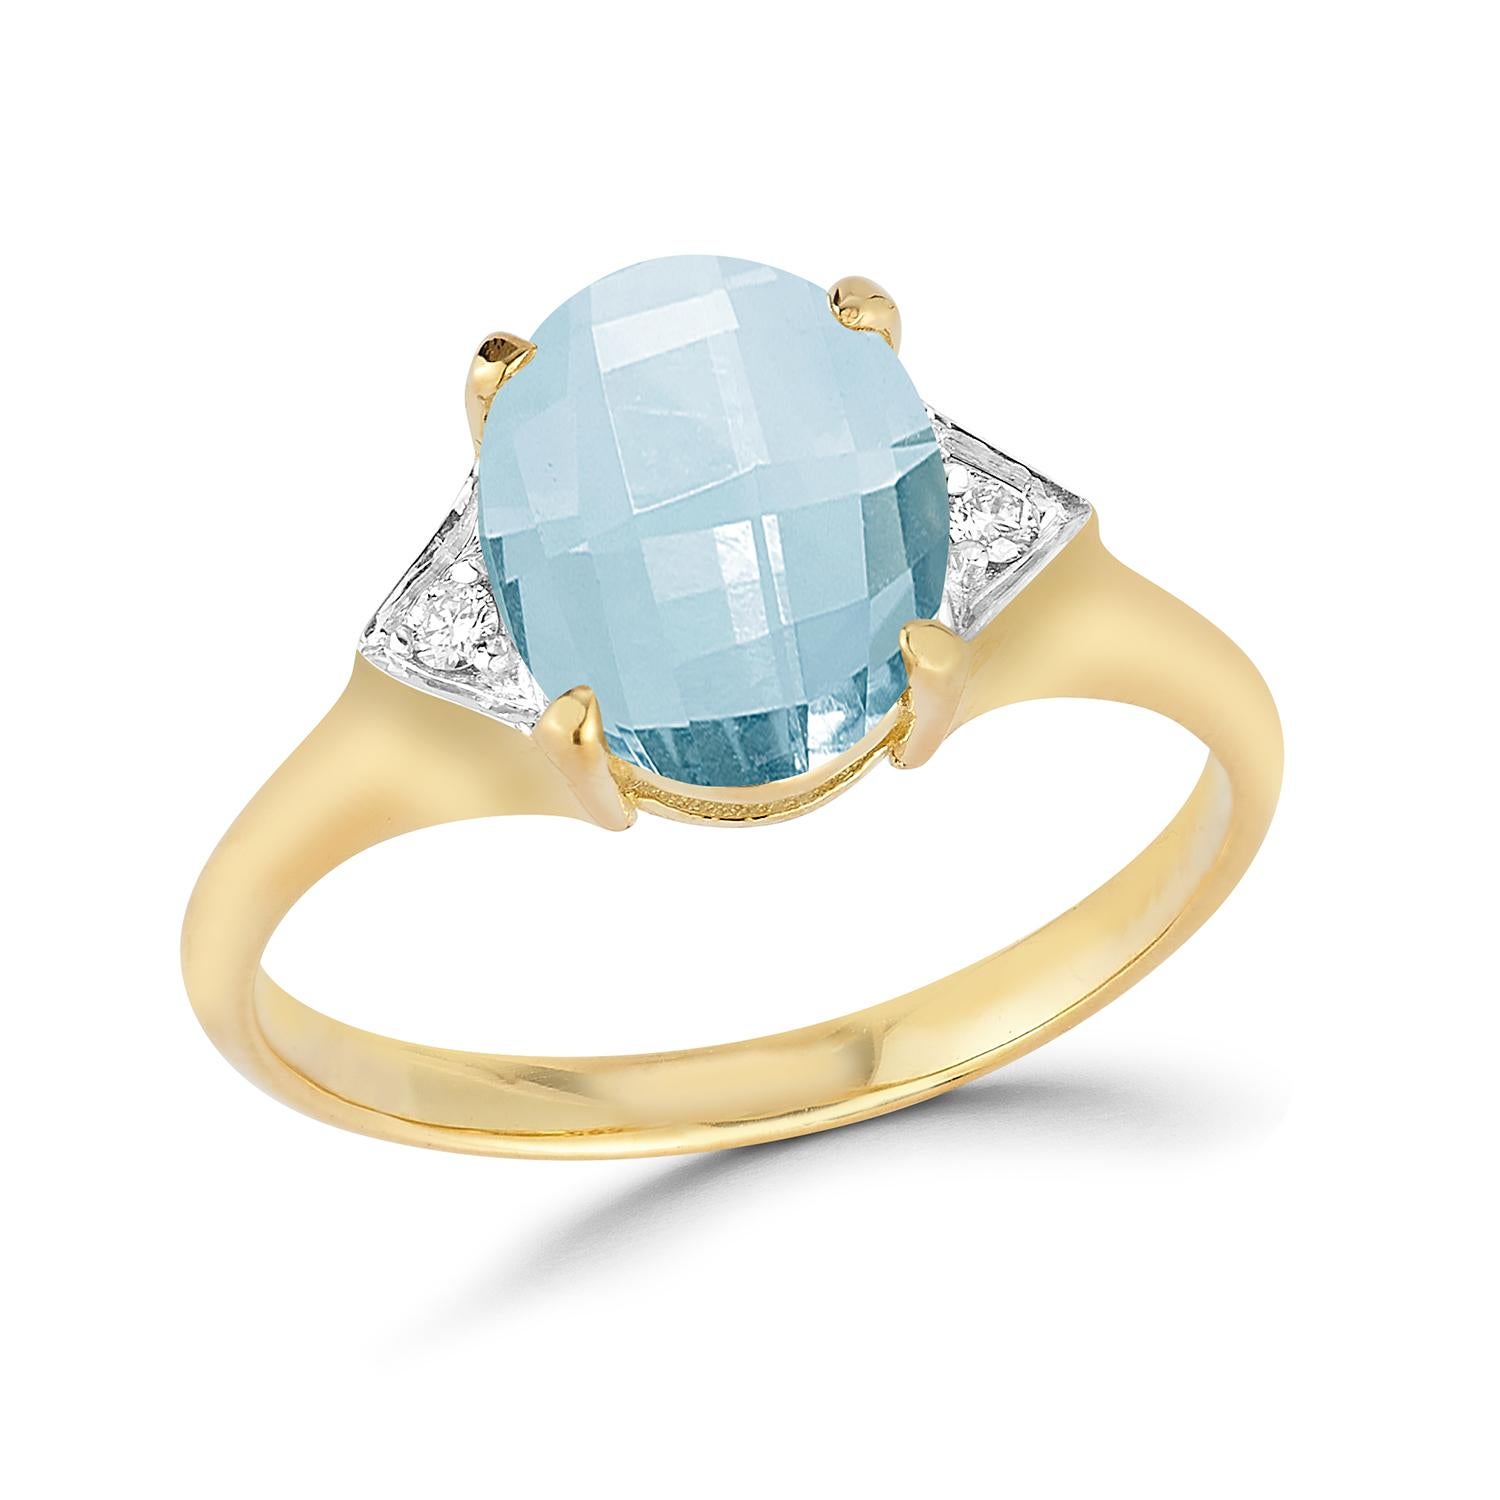 For Sale:  Hand-Crafted 14K Gold 0.05 ct. tw. Diamond & 6.8CT Blue Topaz Cocktail Ring 4